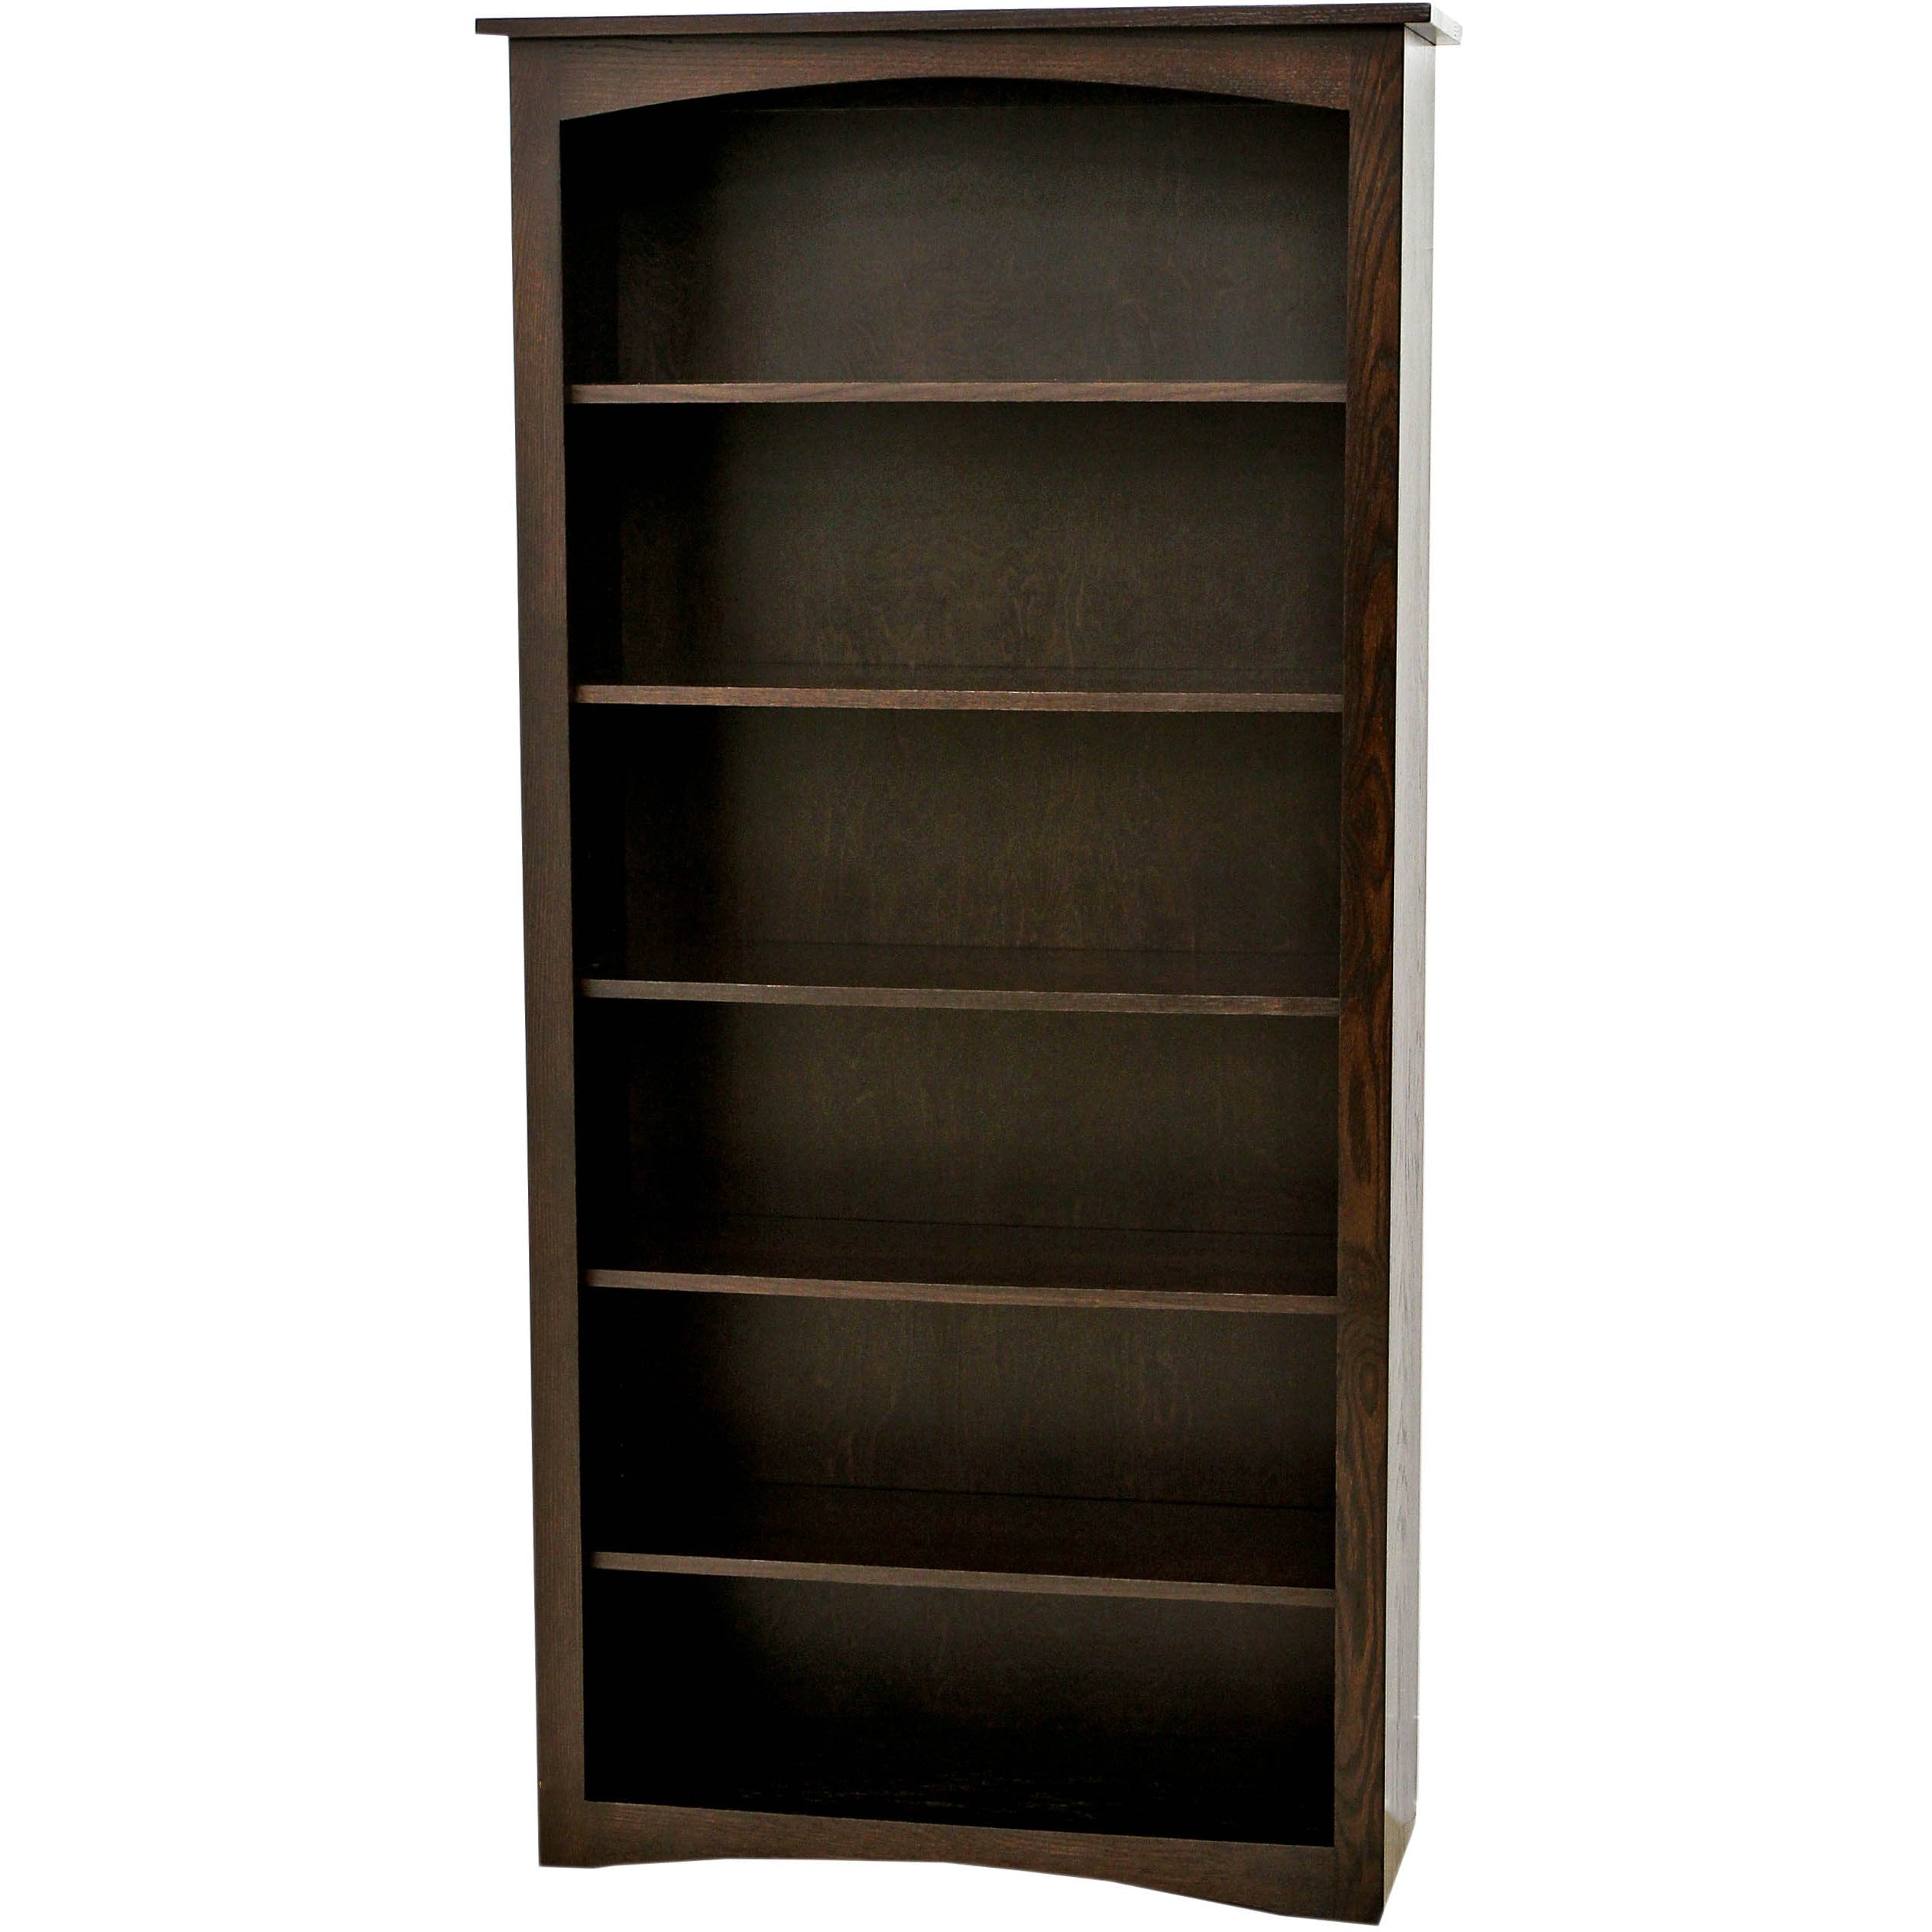 Shaker Solid Wood Bookcase, 72"